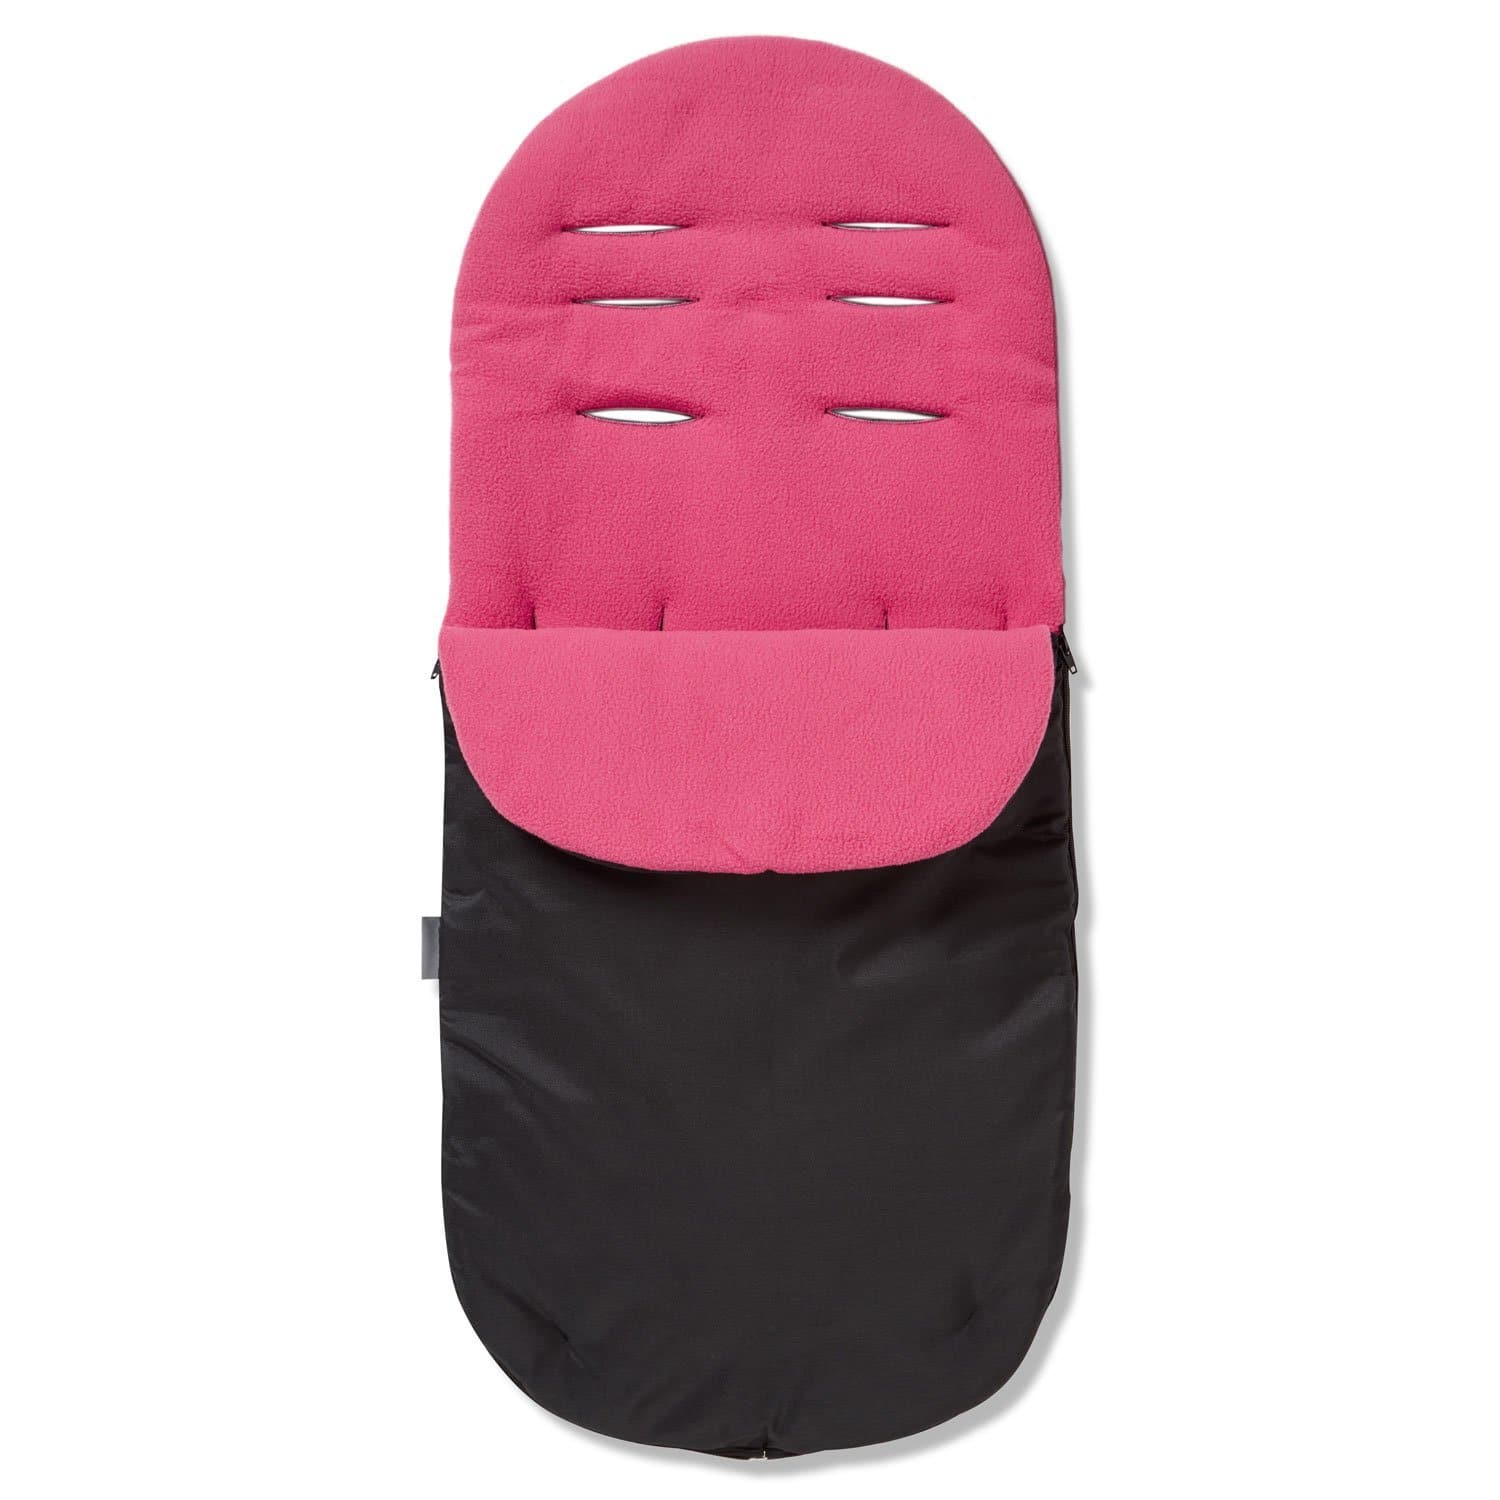 Footmuff / Cosy Toes Compatible with Kiddicare.com - Dark Pink / Fits All Models | For Your Little One